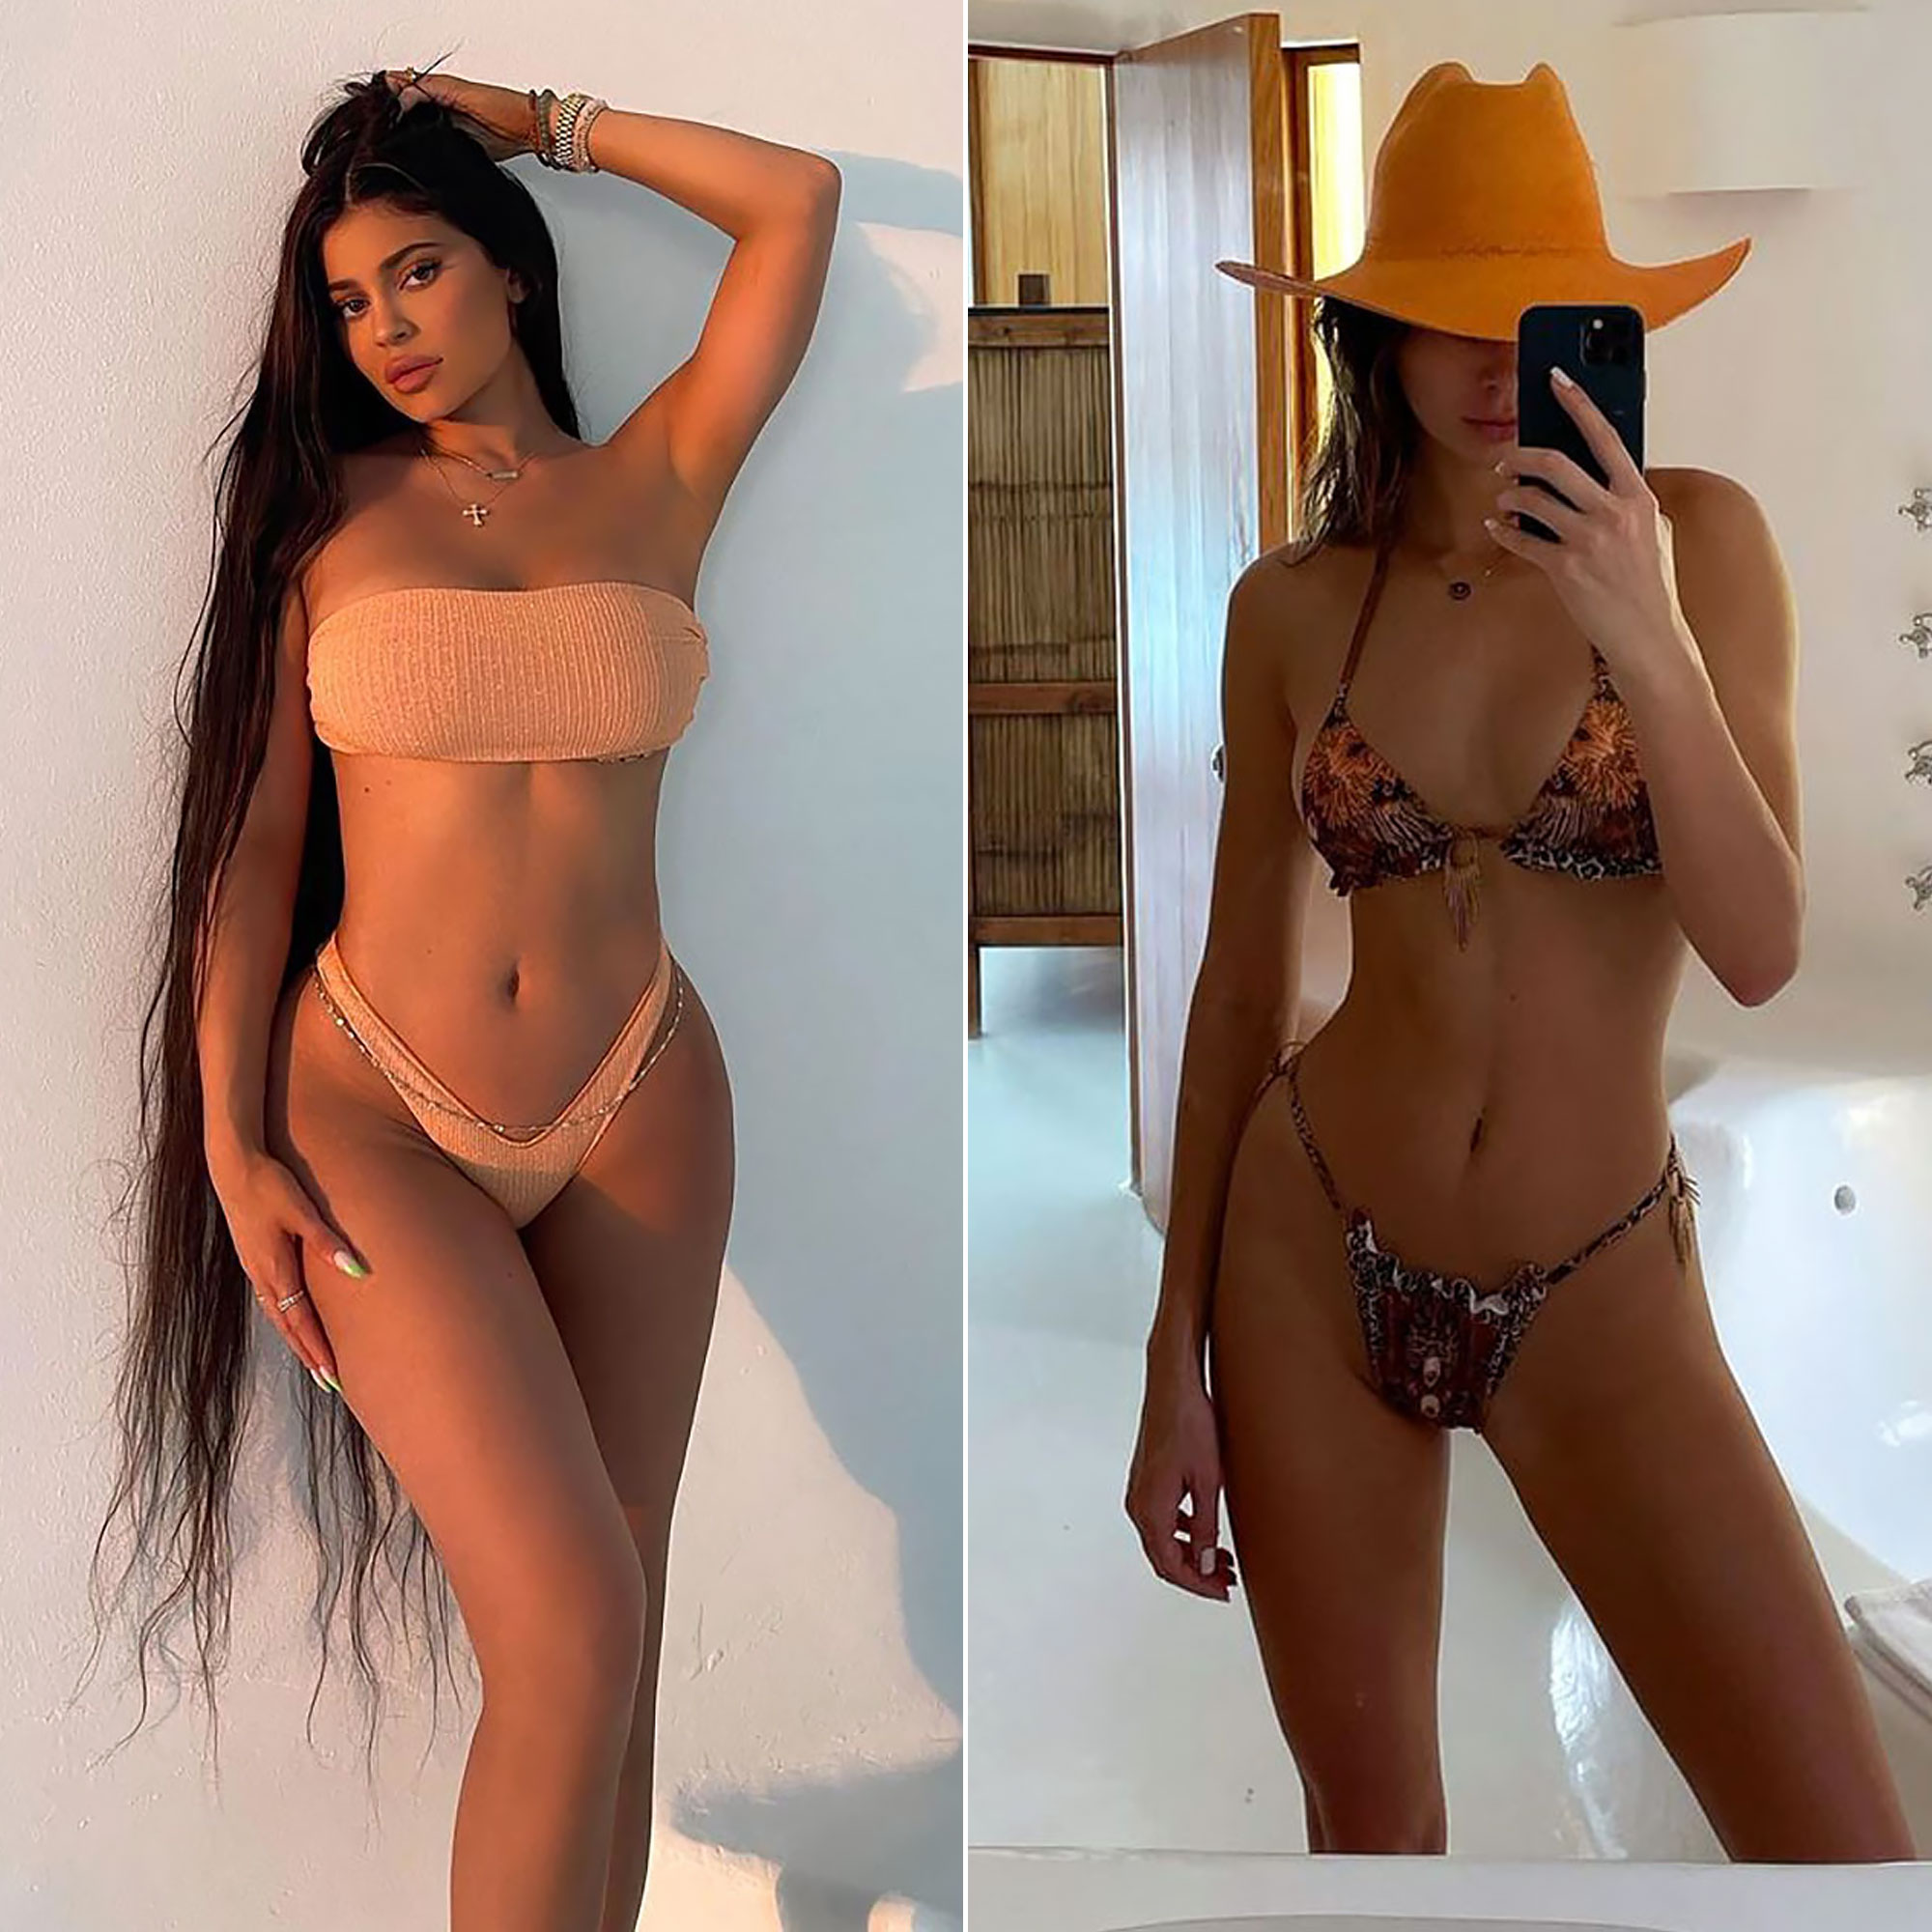 Kendall Off Best Sexy Her Bikini Body (5 Jenner Shows Nude Celebs